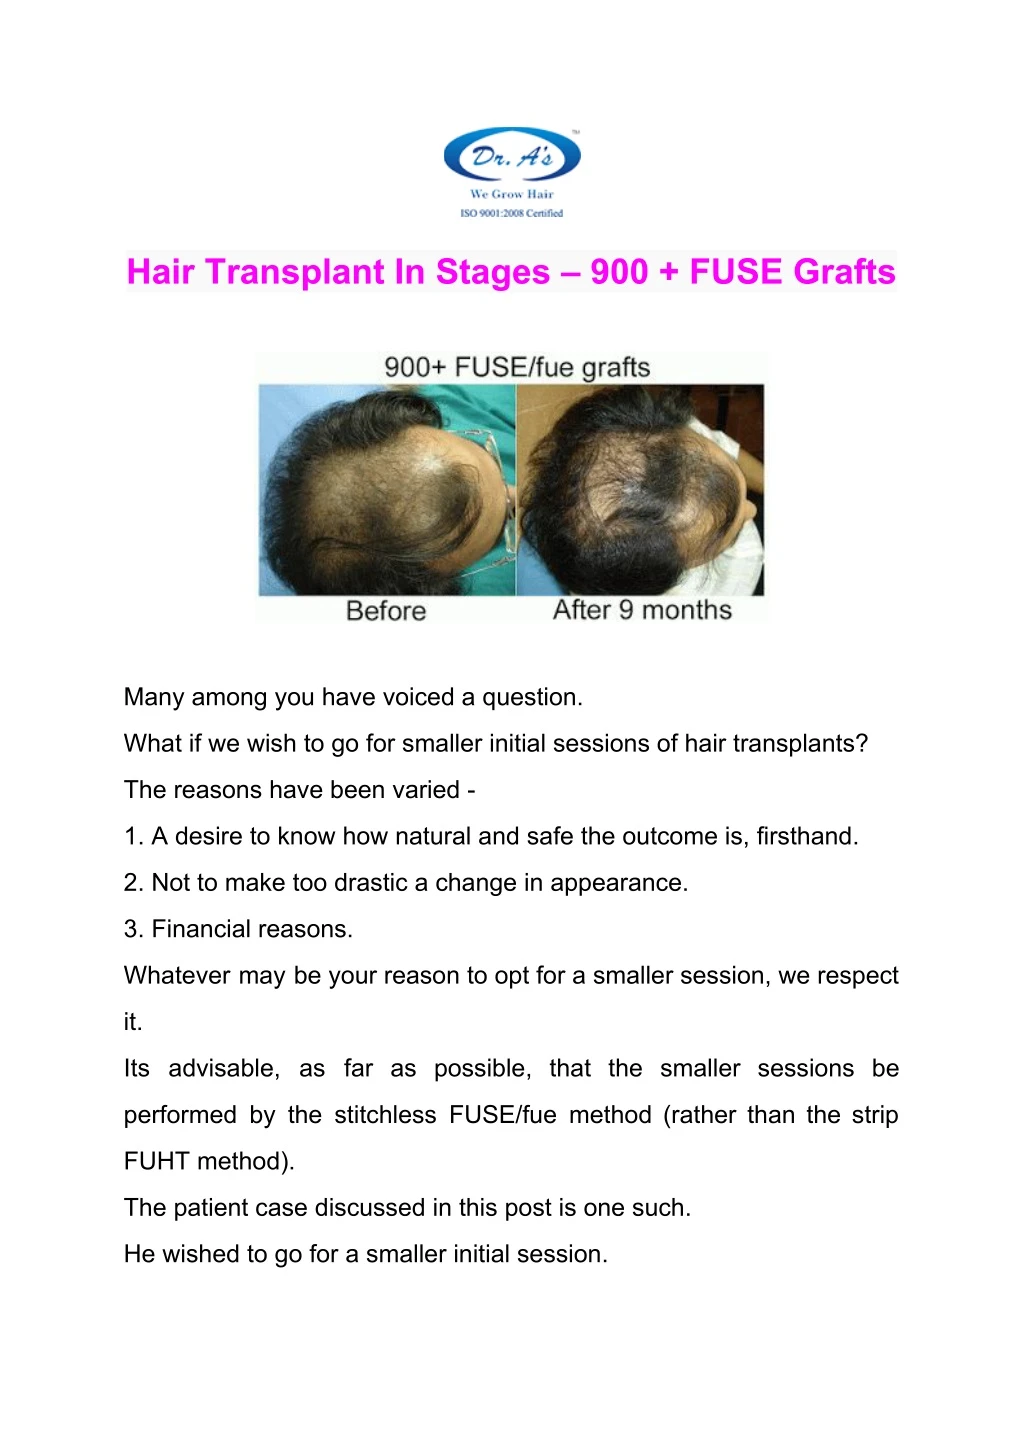 hair transplant in stages 900 fuse grafts